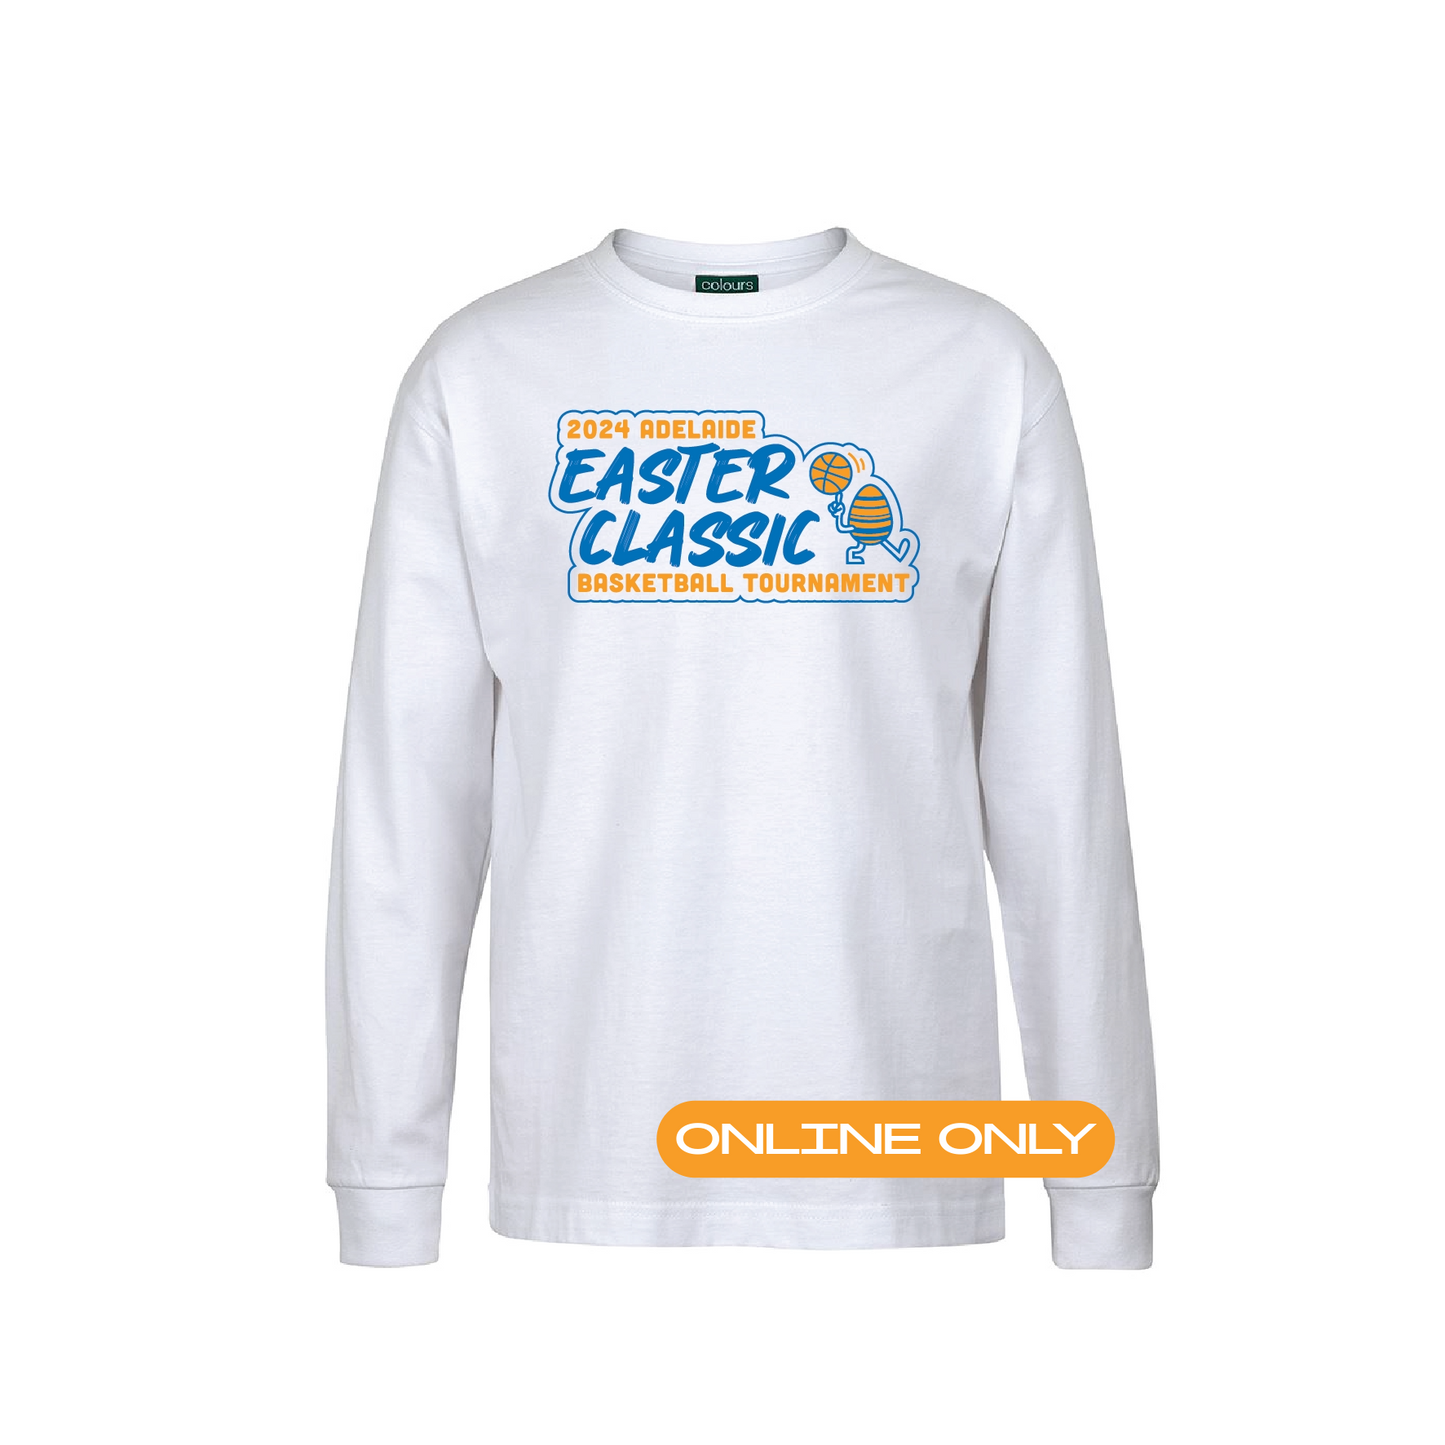 EASTER CLASSIC T-SHIRT WHITE LONG SLEEVE (available online only)